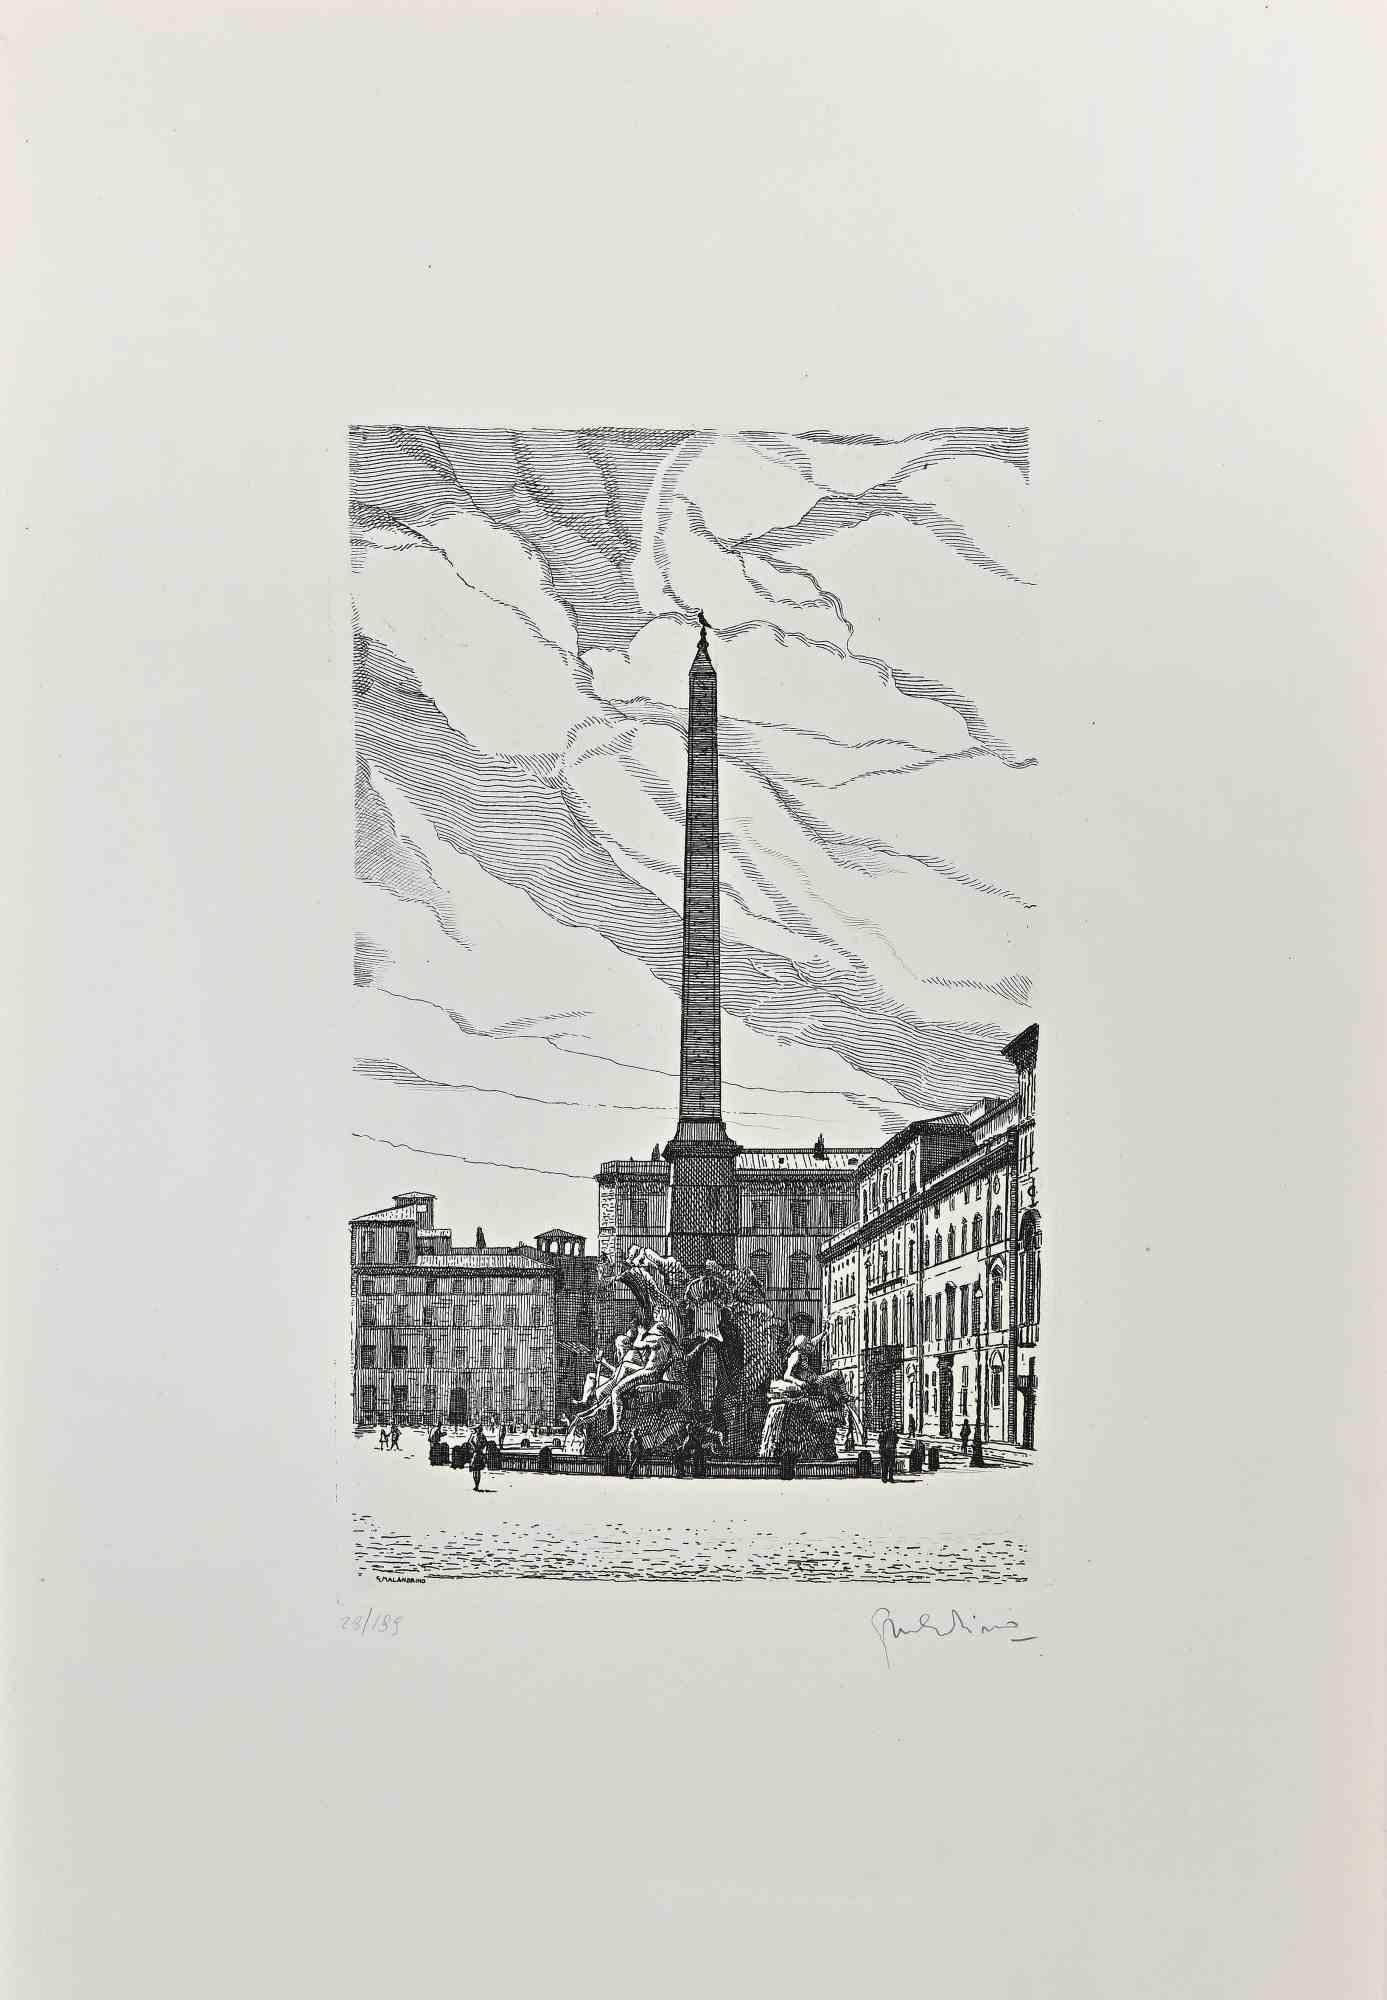 Fountain of the Four Rivers is a contemporary artwork realized in 1970 by the Italian artist Giuseppe Malandrino (Modica, 1910 - Rome, 1979).

Etching on cardboard. Hand-signed in pencil lower right.

Numbered bottom left 28/199.

Signed on the